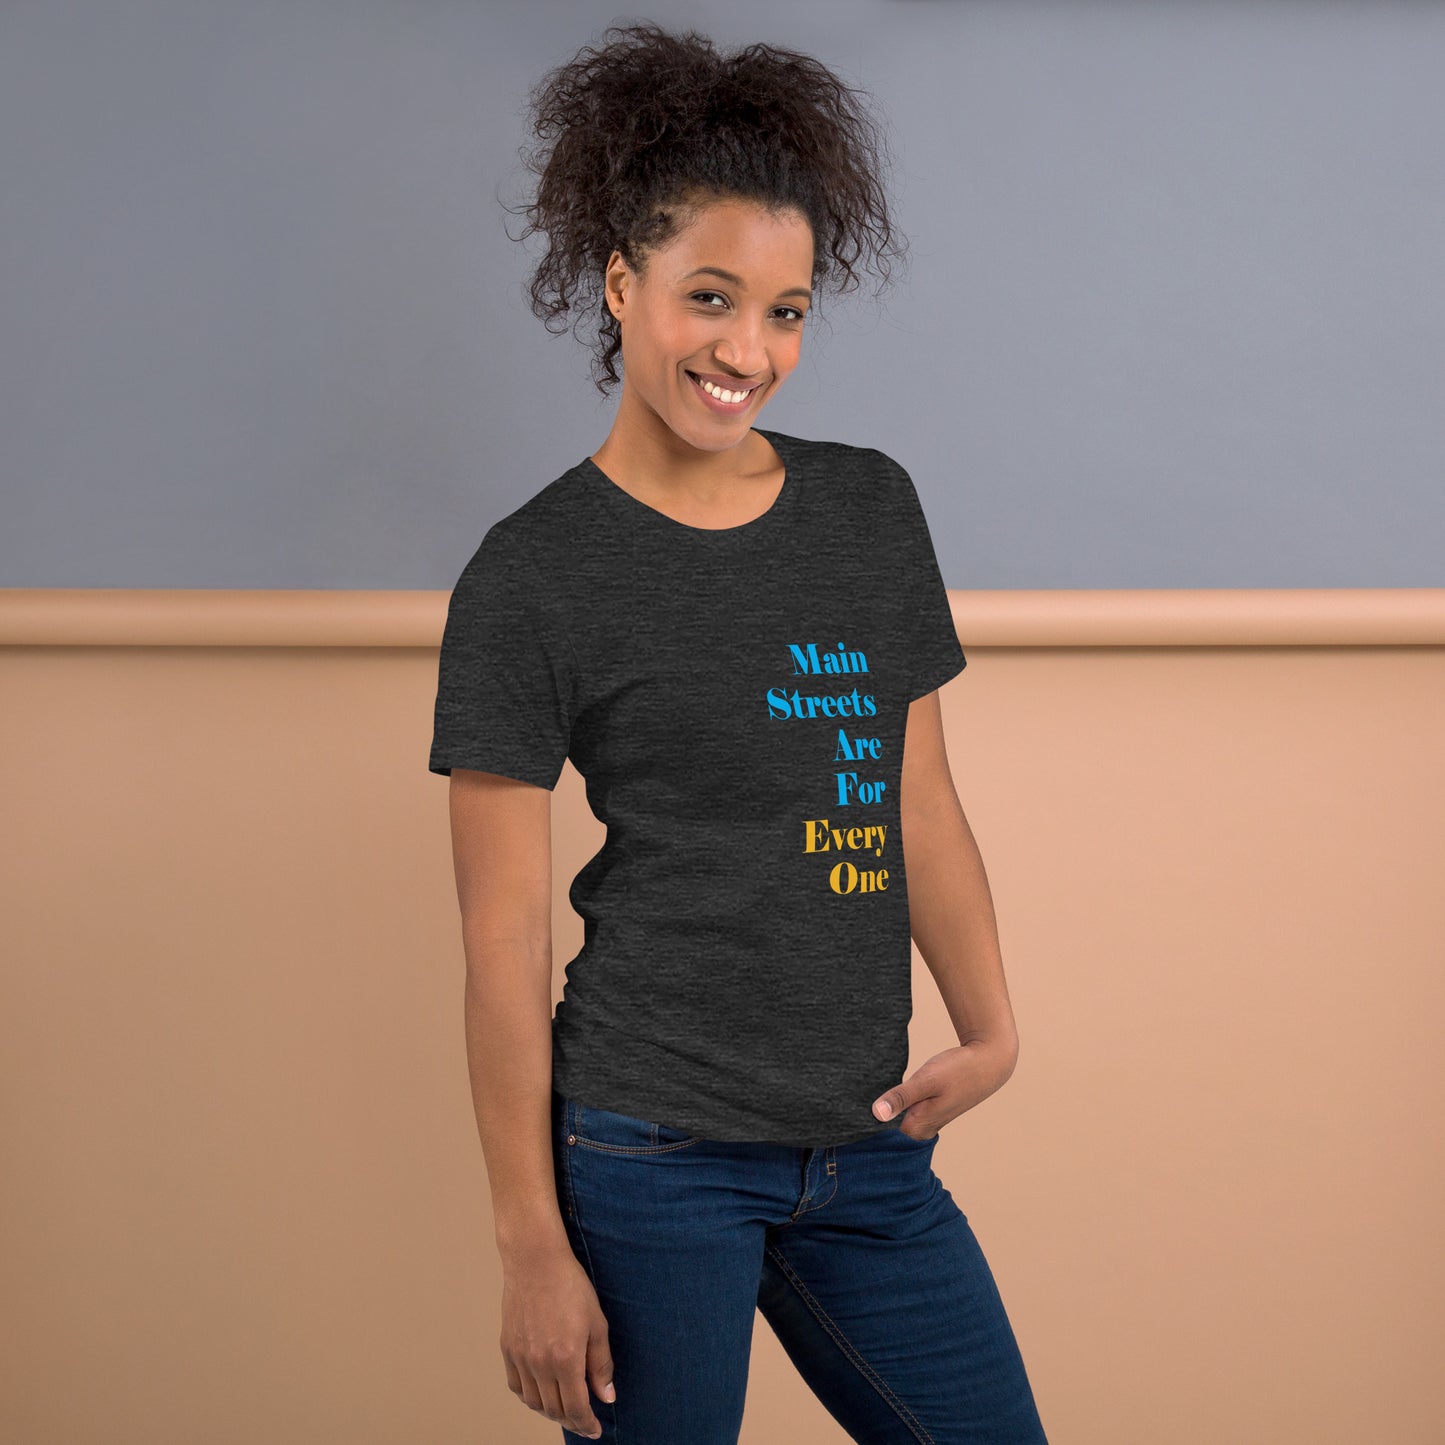 Main Streets Are For Everyone (Blue & Yellow) Unisex T-shirt